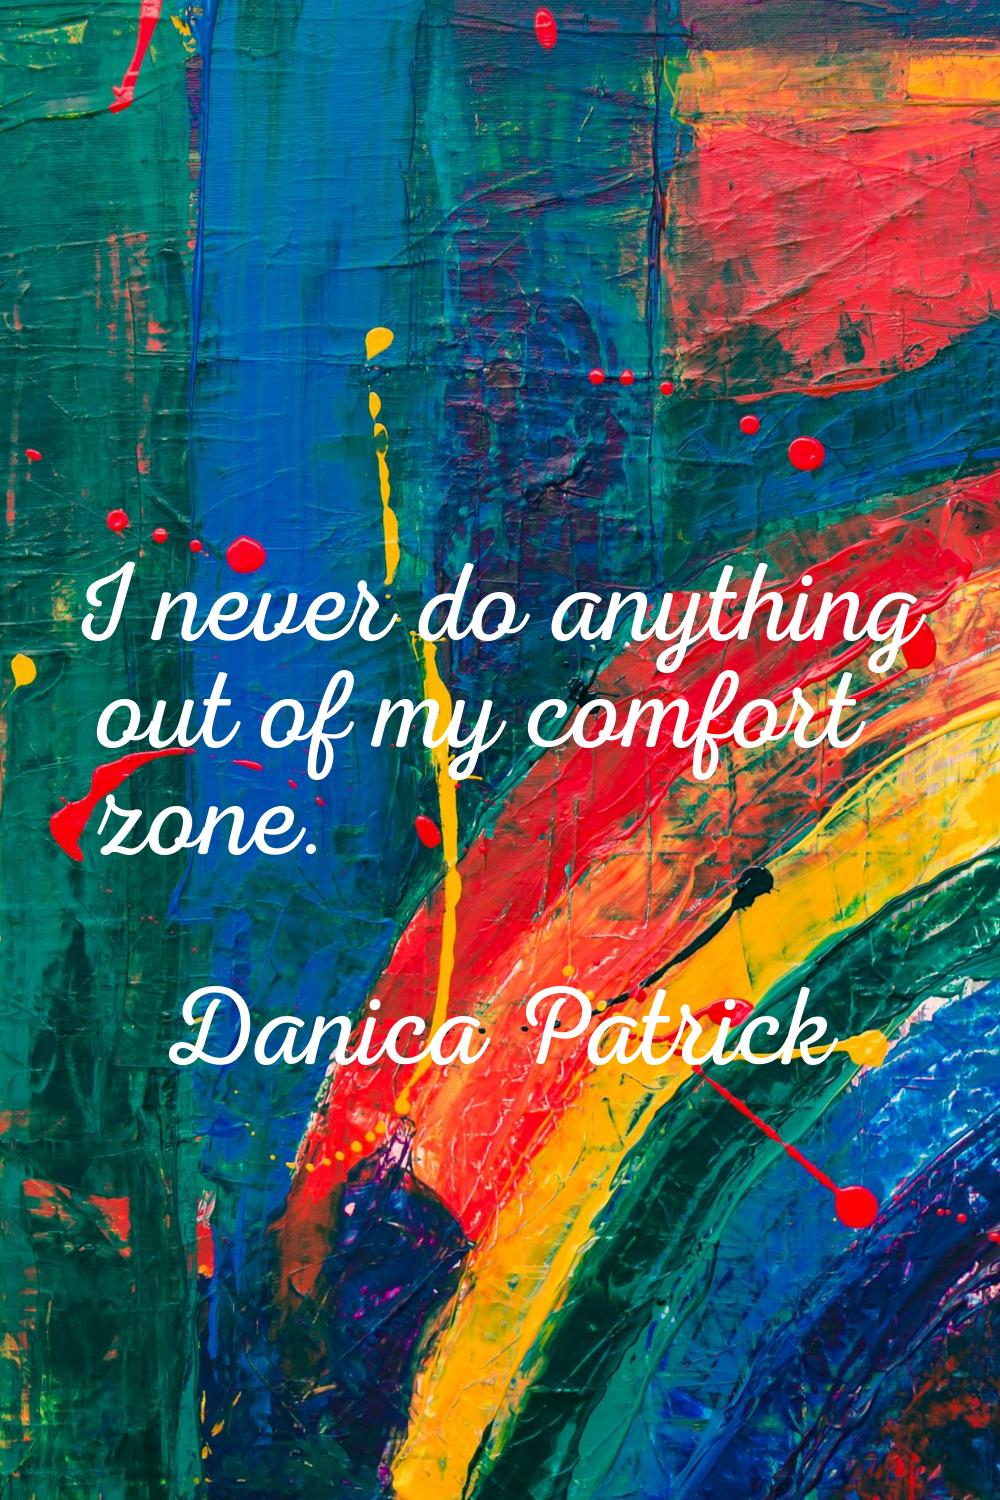 I never do anything out of my comfort zone.